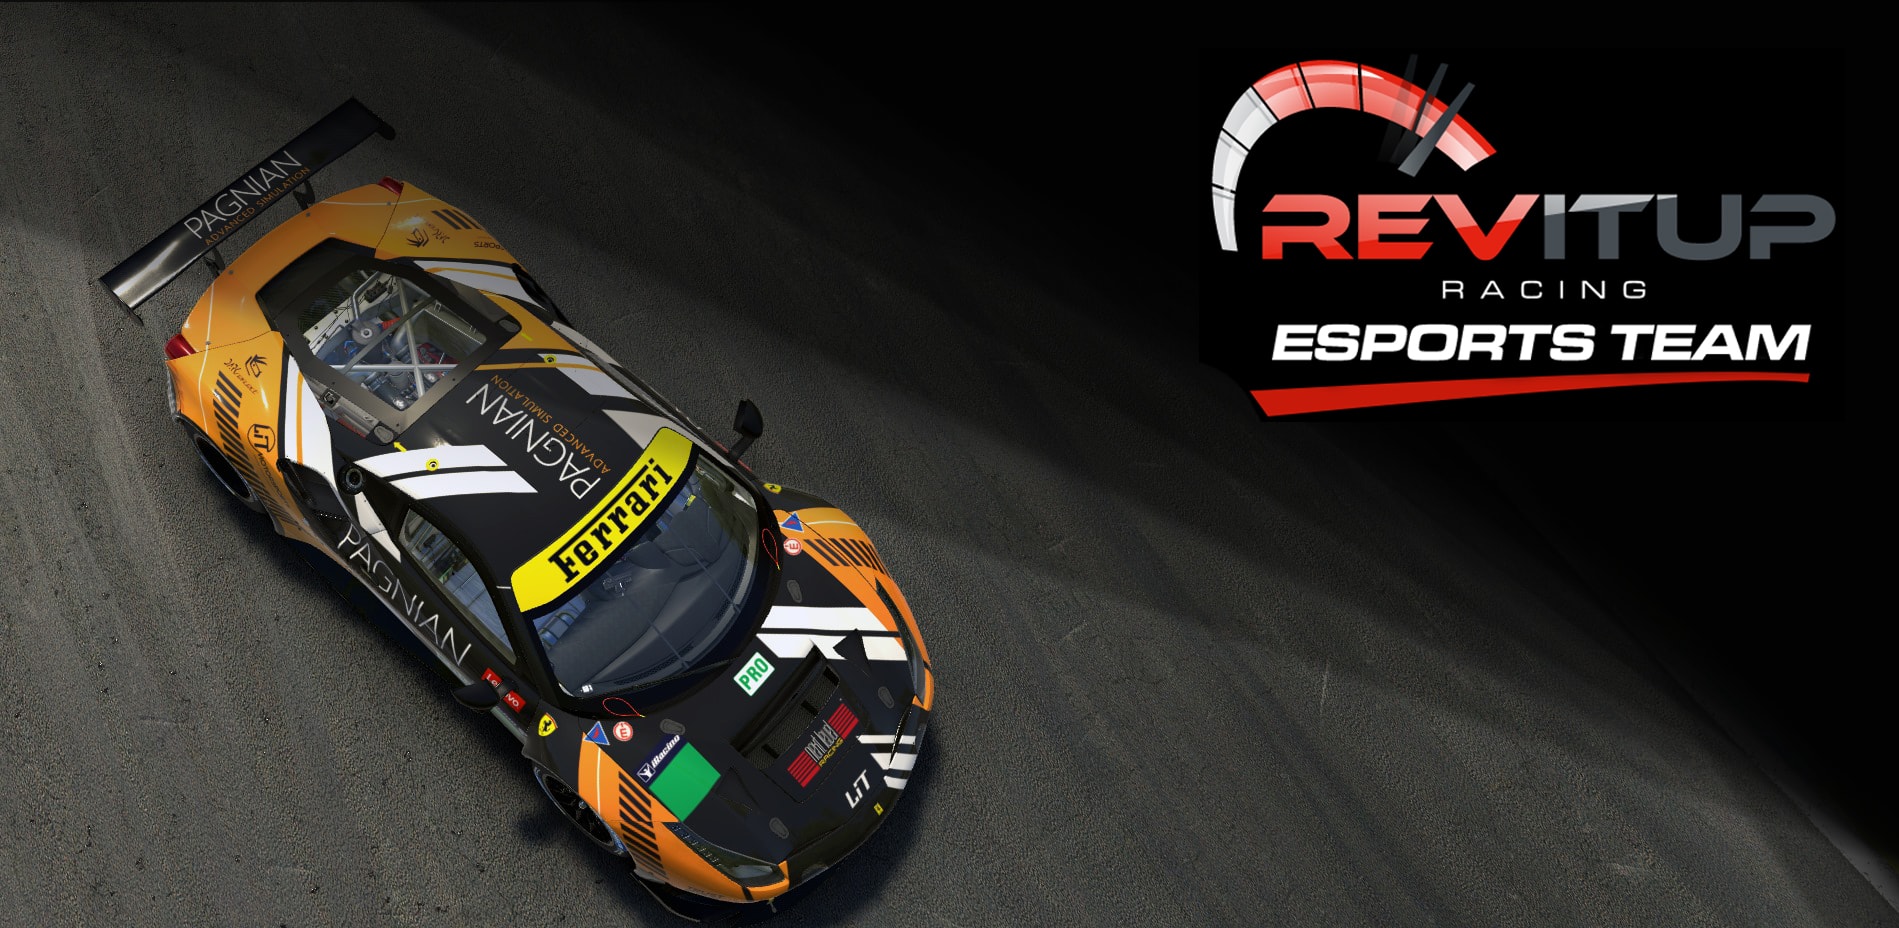 Announcing the Rev It Up Racing eSports Team